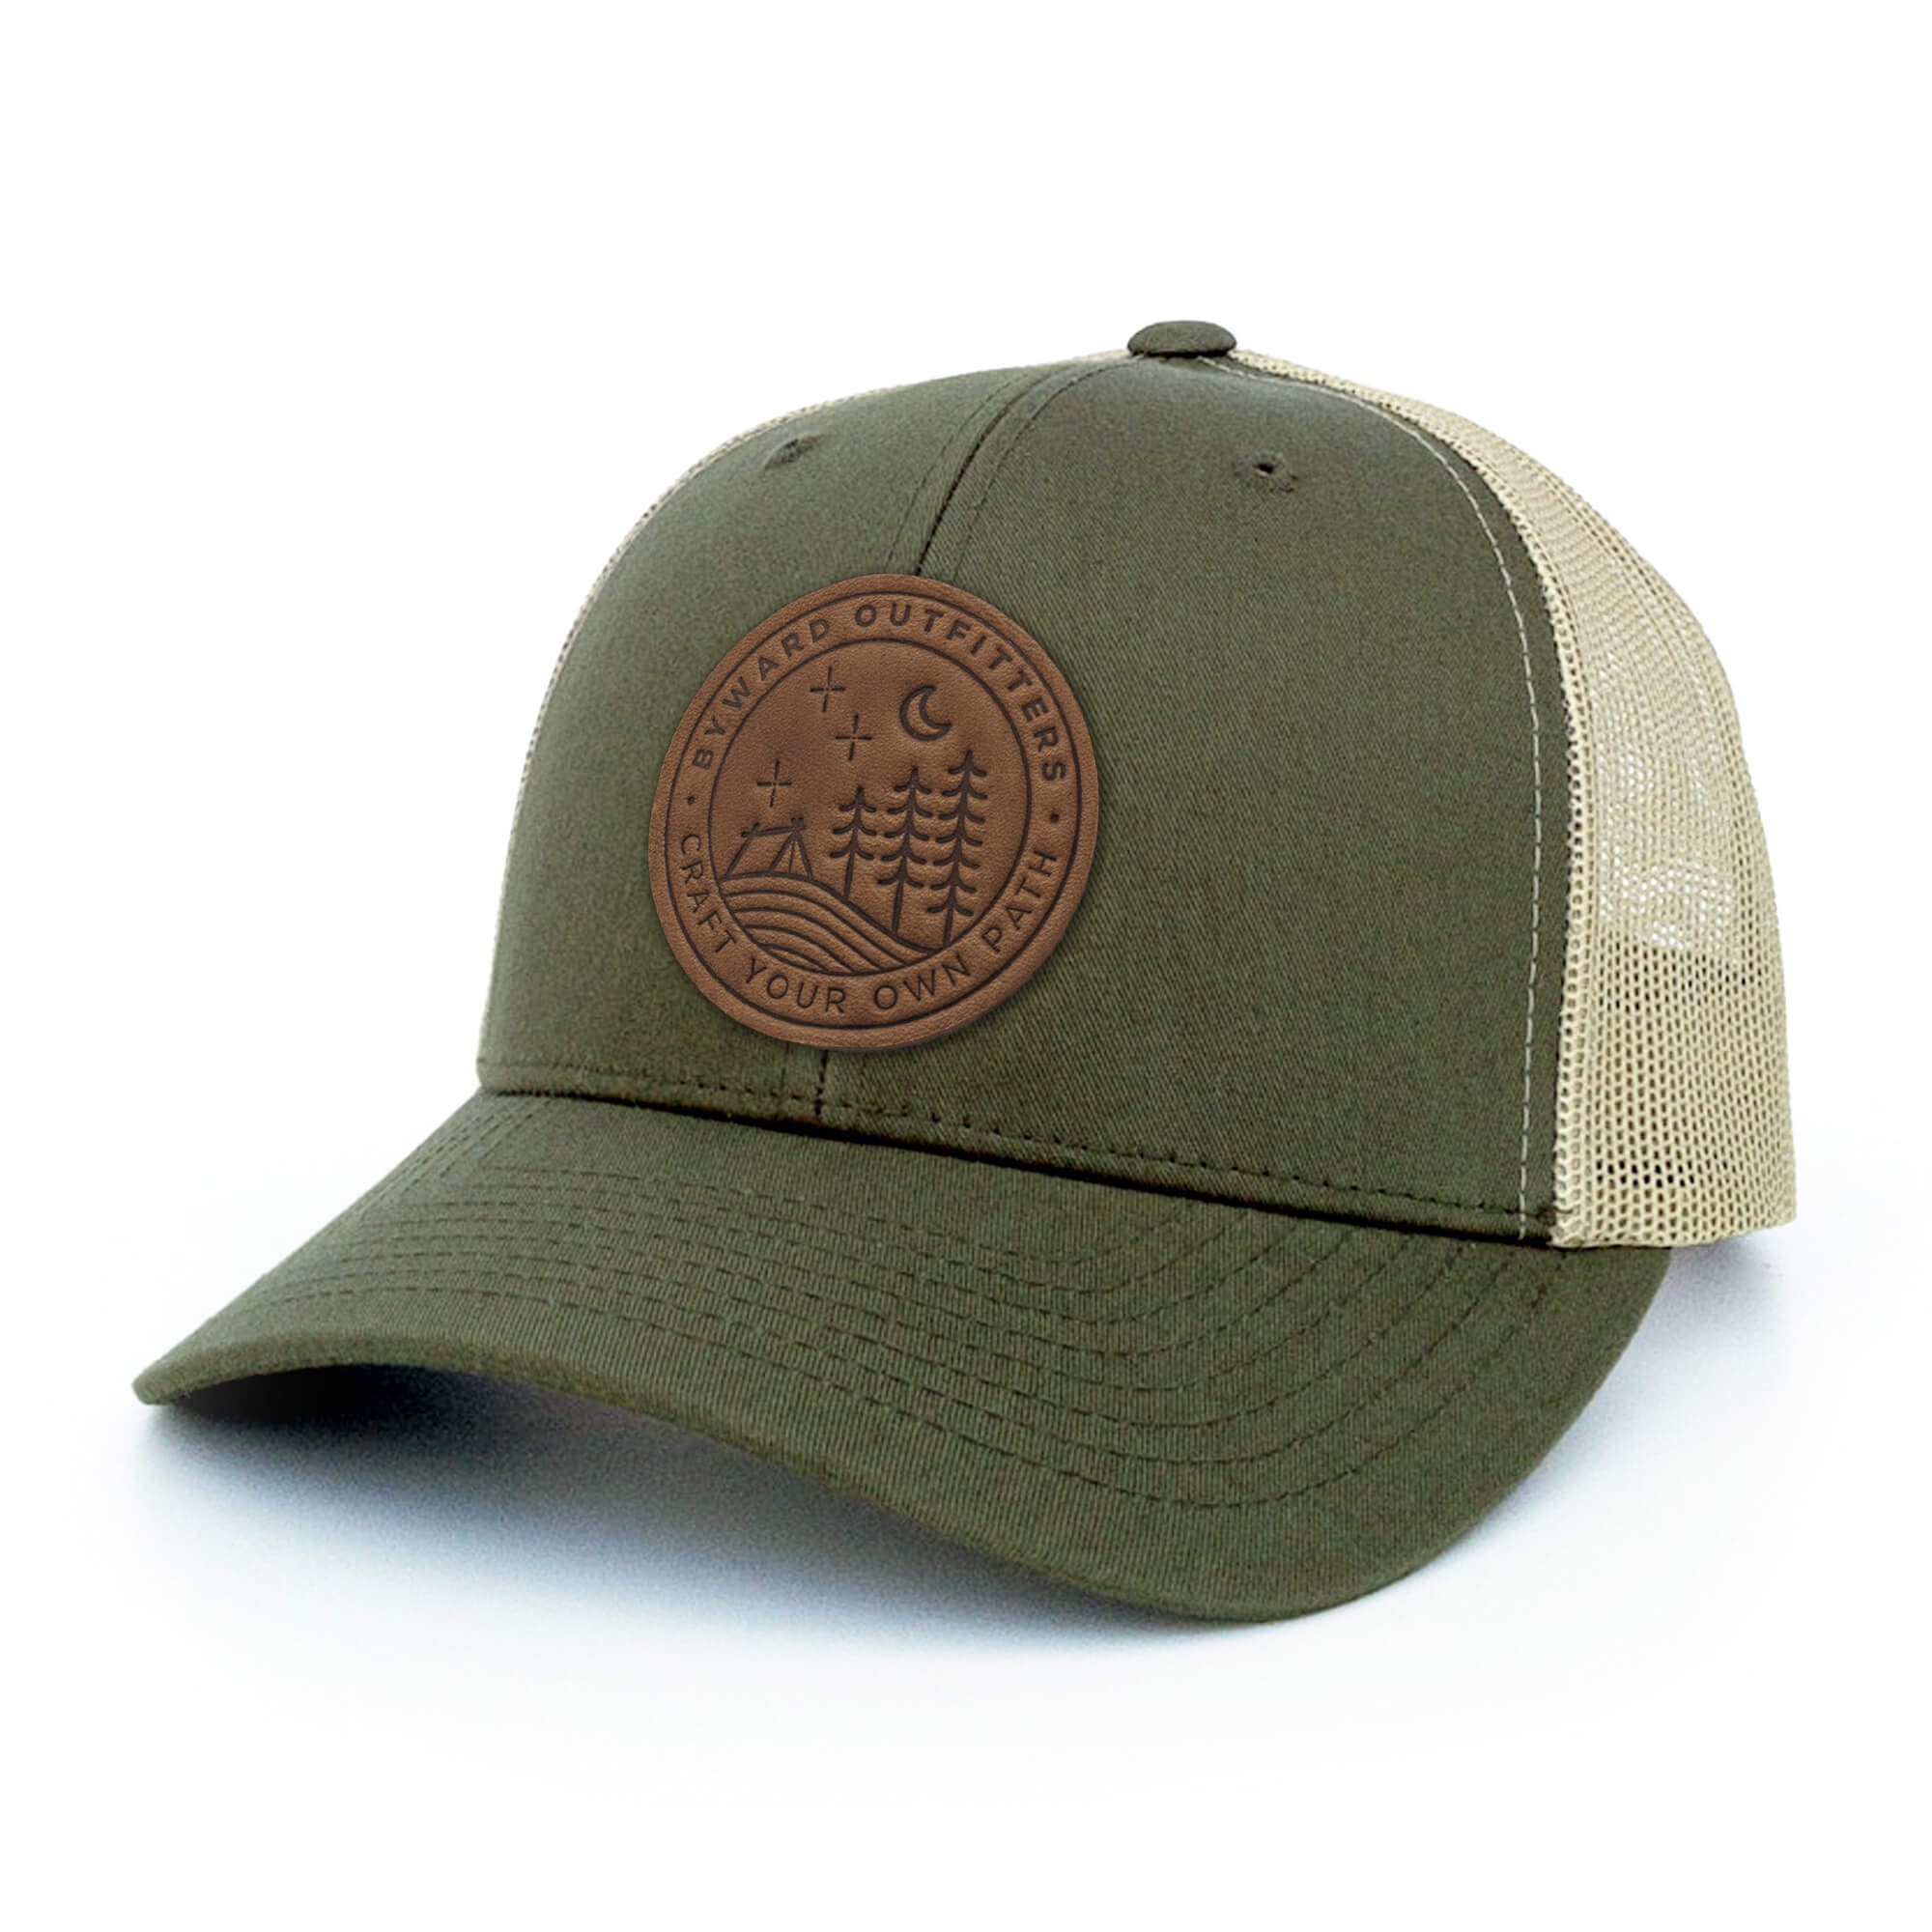 Moss Green and khaki trucker hat with full-grain leather patch of Stellar Night | BLACK-005-001, CHARC-005-001, NAVY-005-001, HGREY-005-001, MOSS-005-001, BROWN-005-001